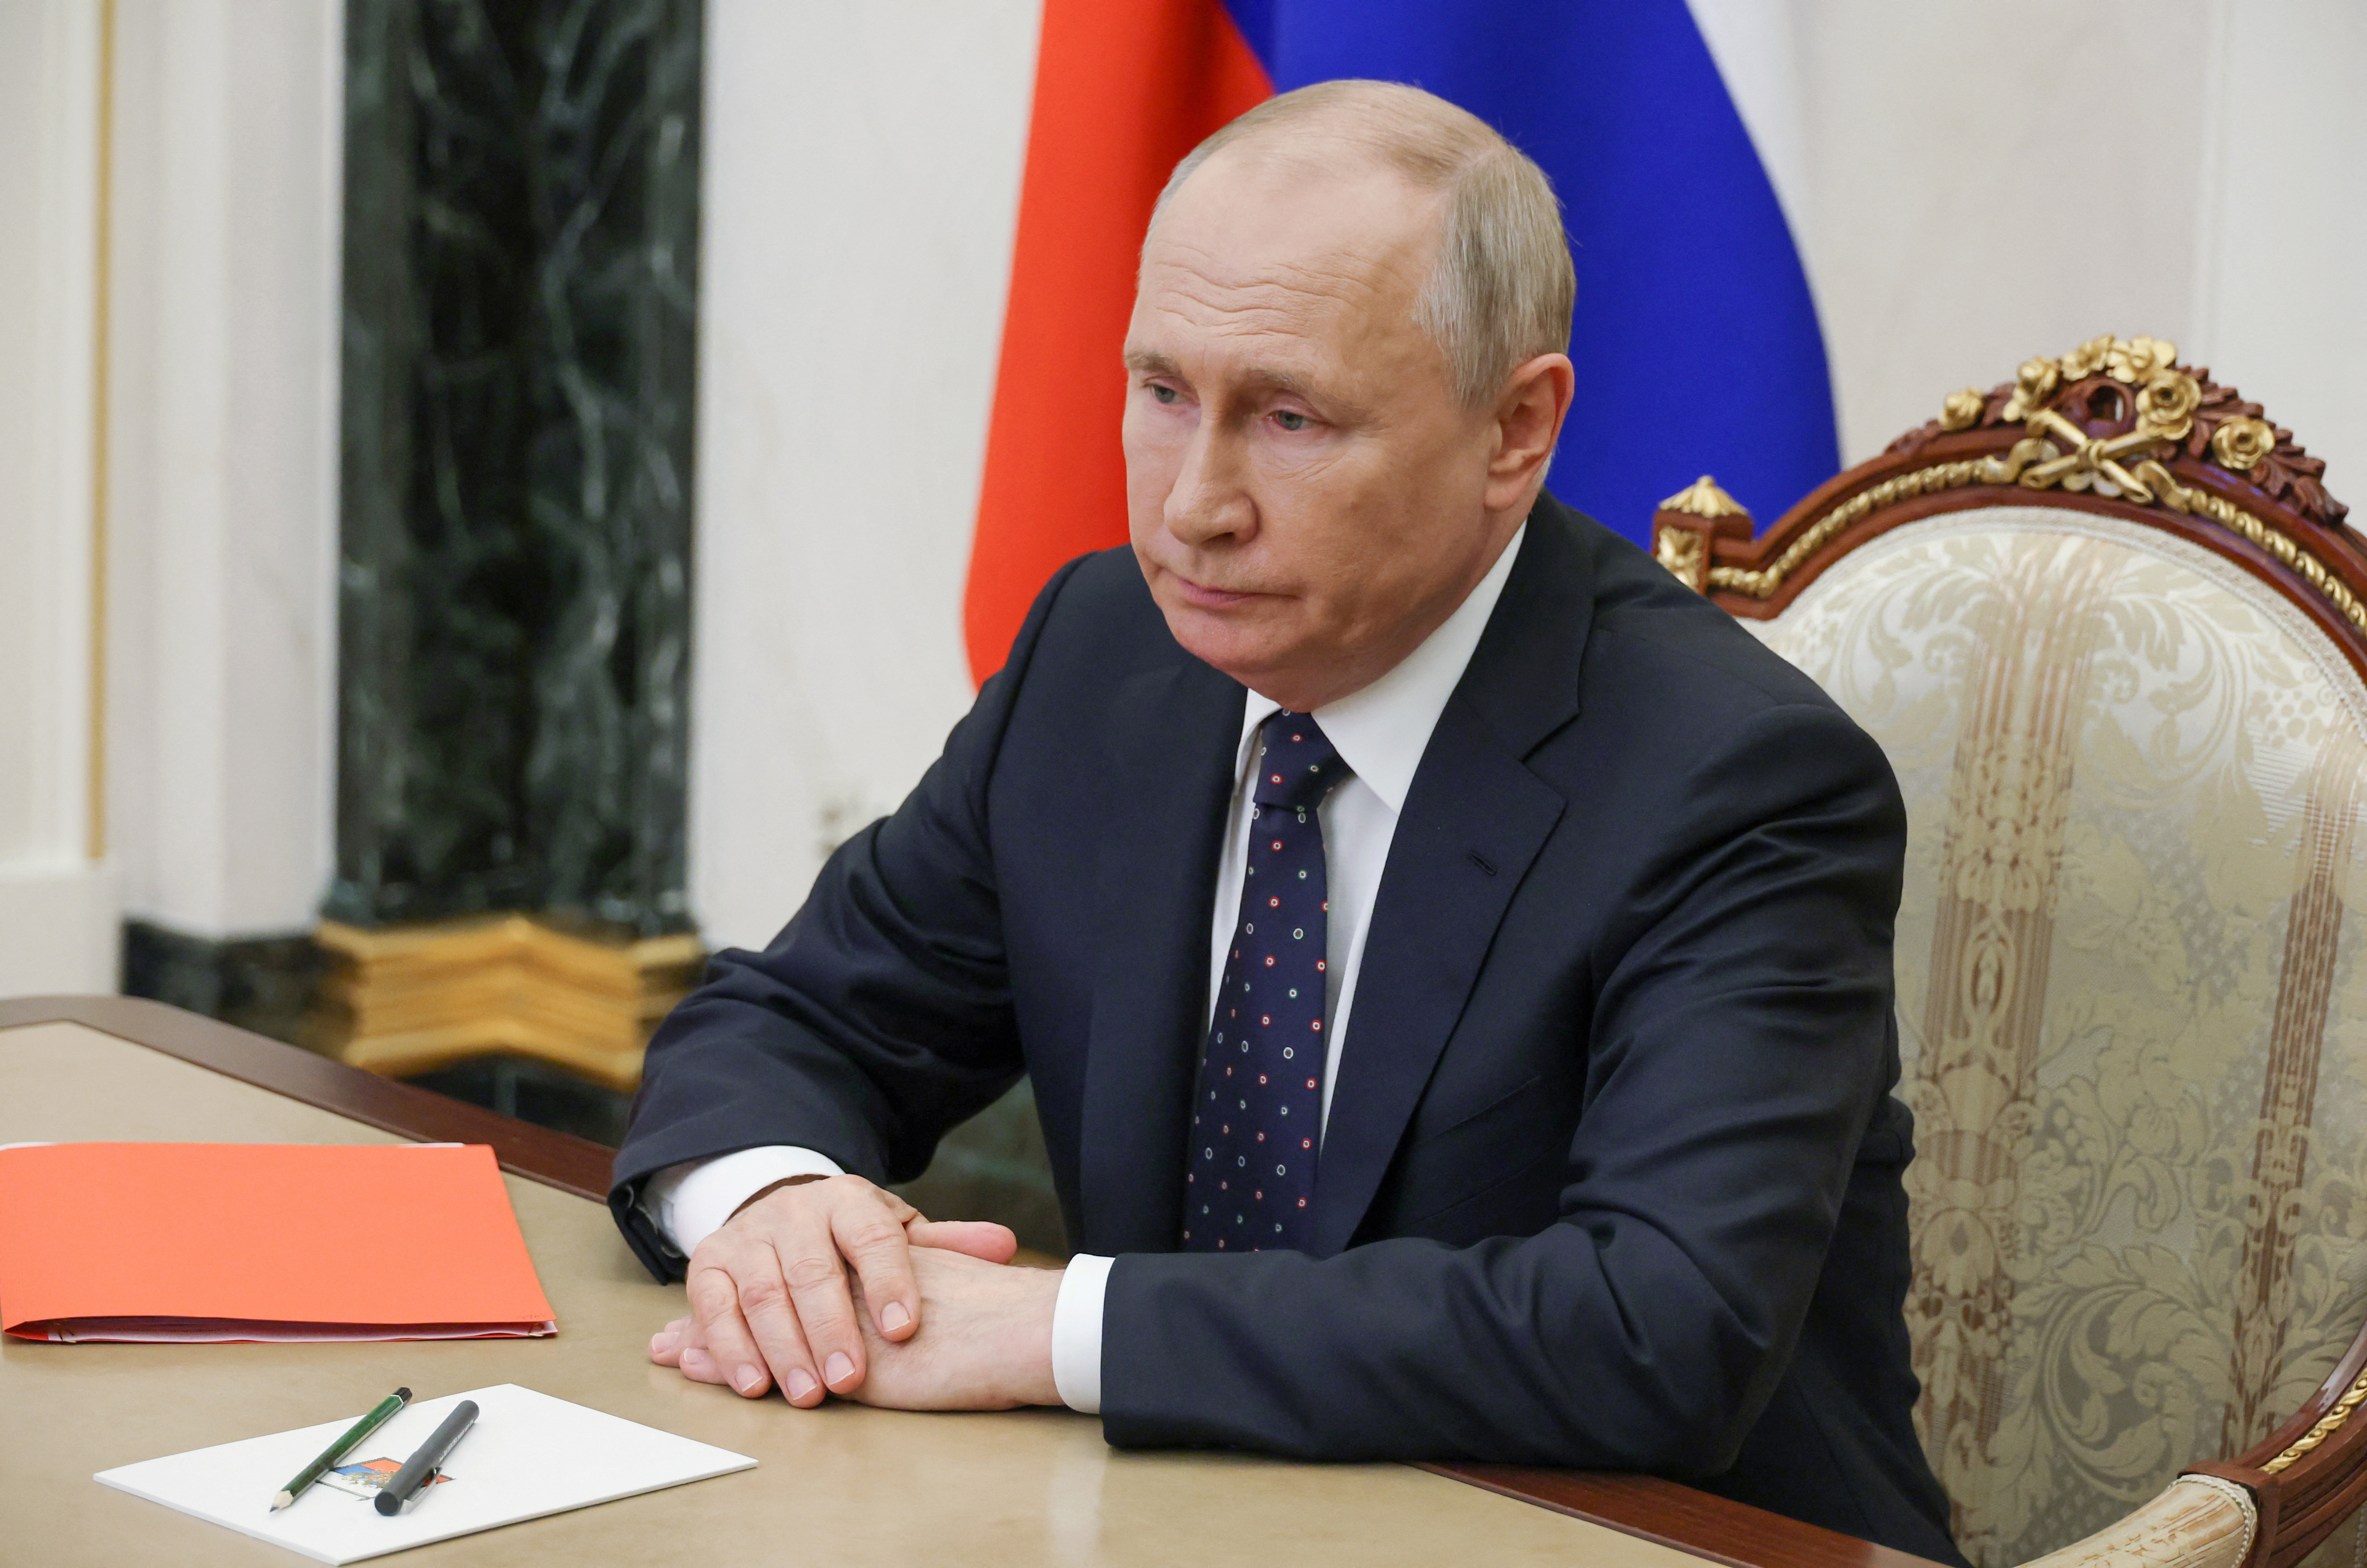 image Kremlin says Putin&#8217;s comments on nuclear weapons did not constitute a threat to use them